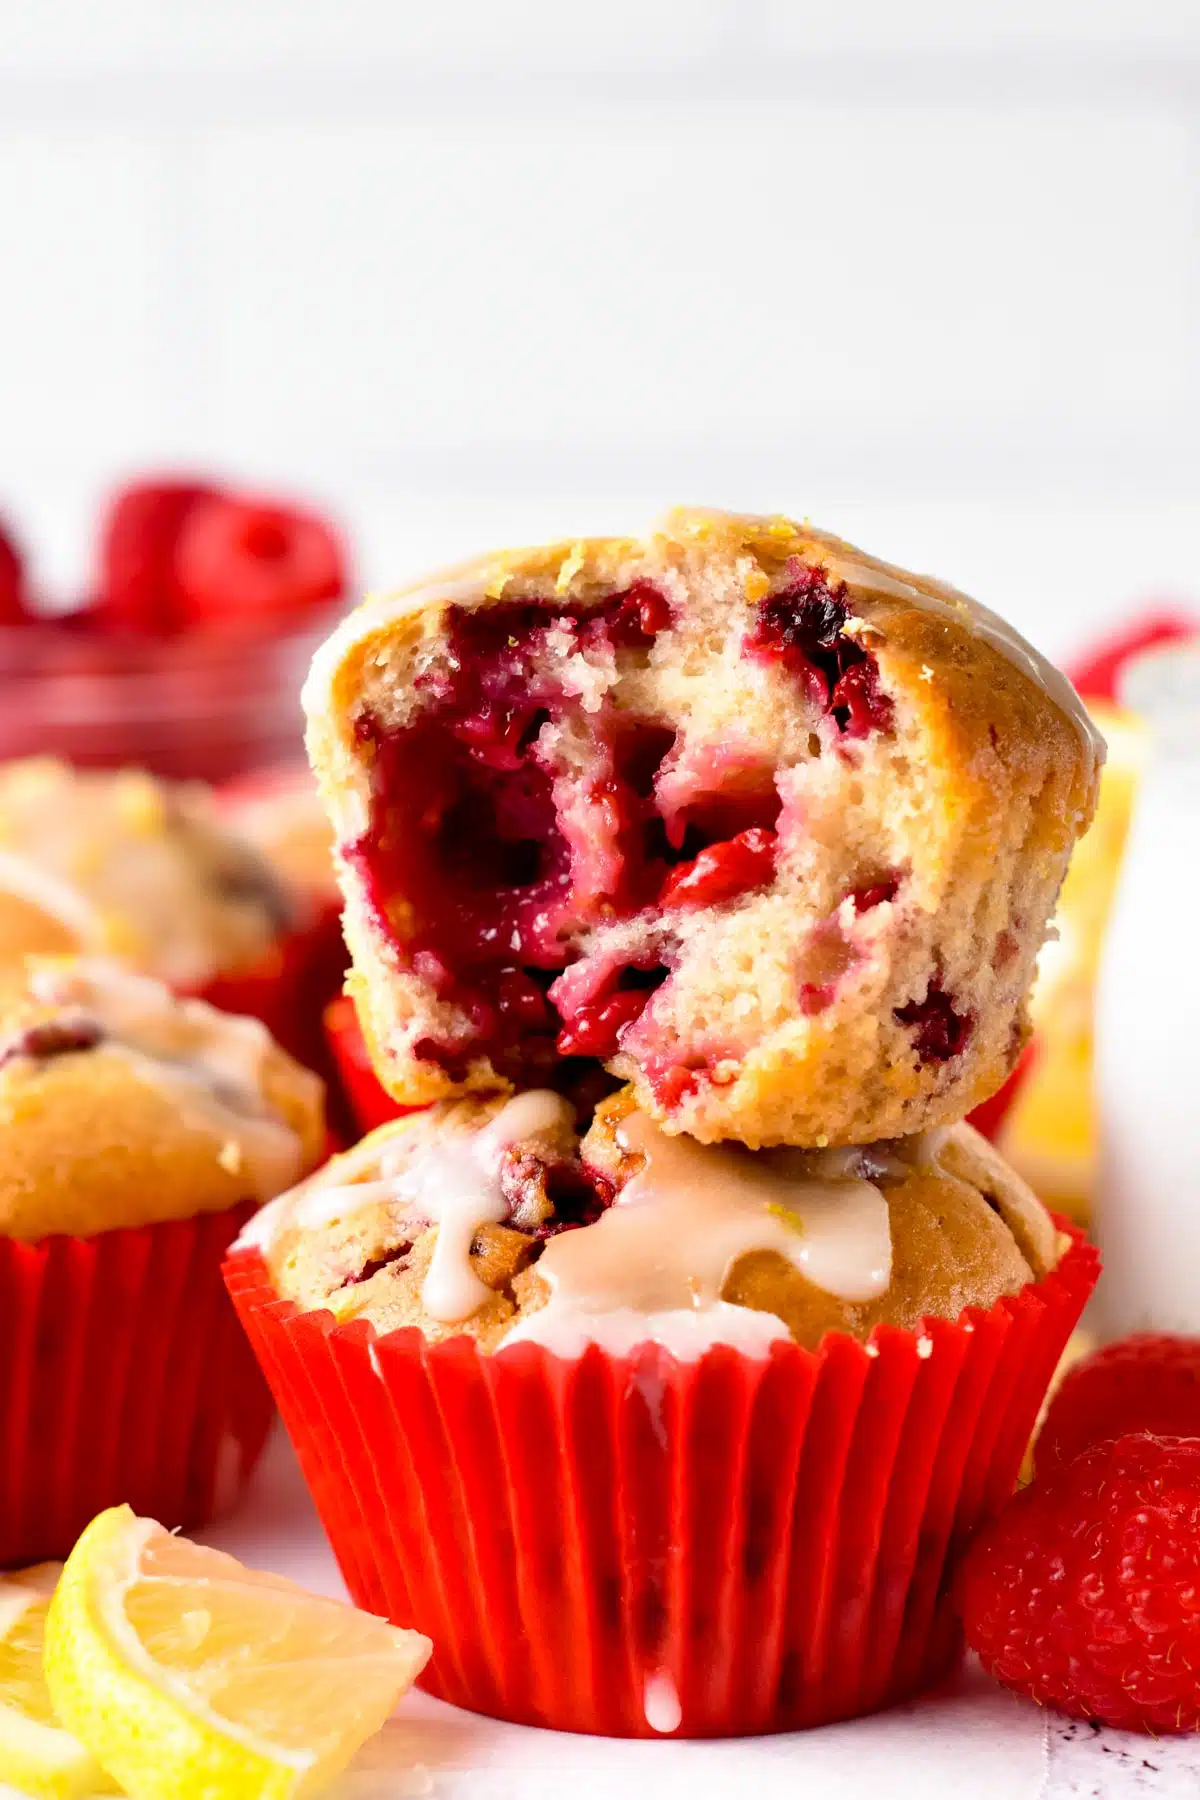 These Raspberry Lemon Muffins are easy raspberry muffins with a hint of lemon and sweet lemon glazing. A perfect fruit muffin for berry lovers.These Raspberry Lemon Muffins are easy raspberry muffins with a hint of lemon and sweet lemon glazing. A perfect fruit muffin for berry lovers.